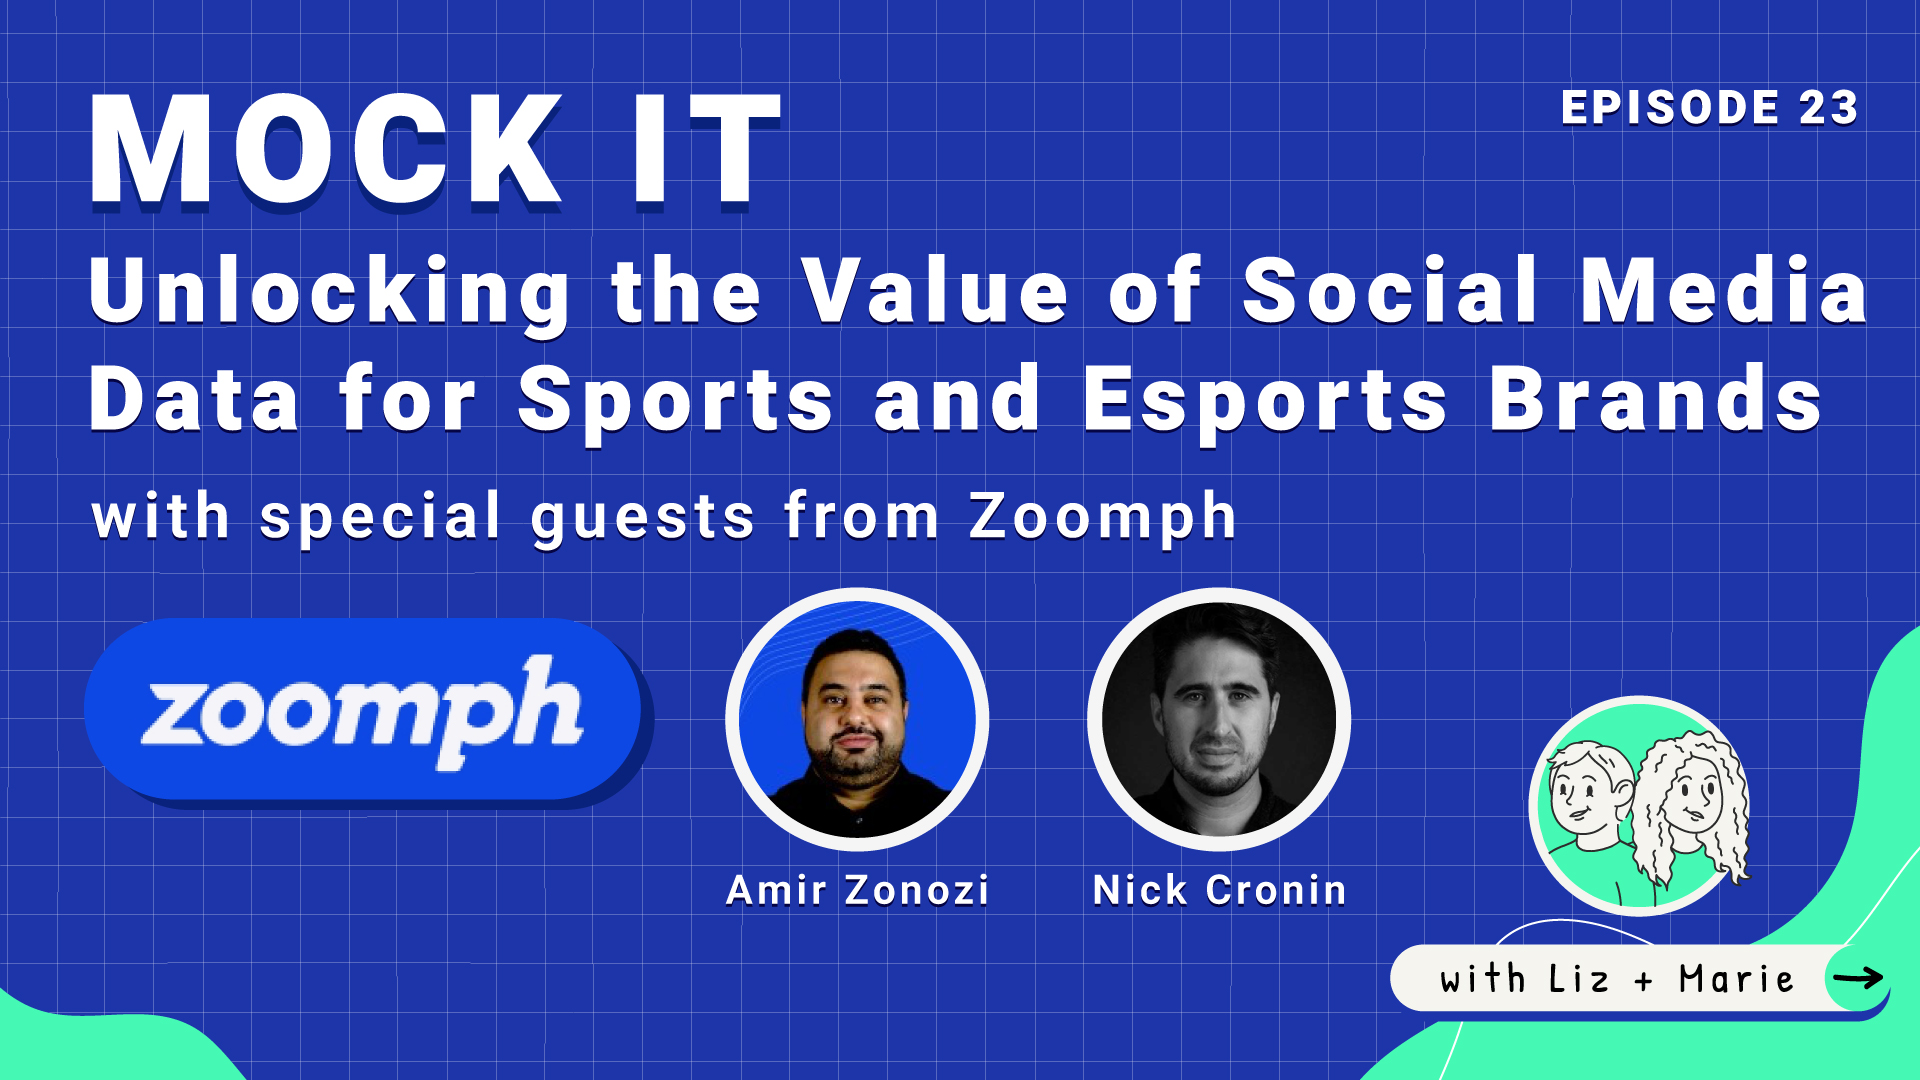 Zoomph's Approach to Hiring Women in Sports and Tech